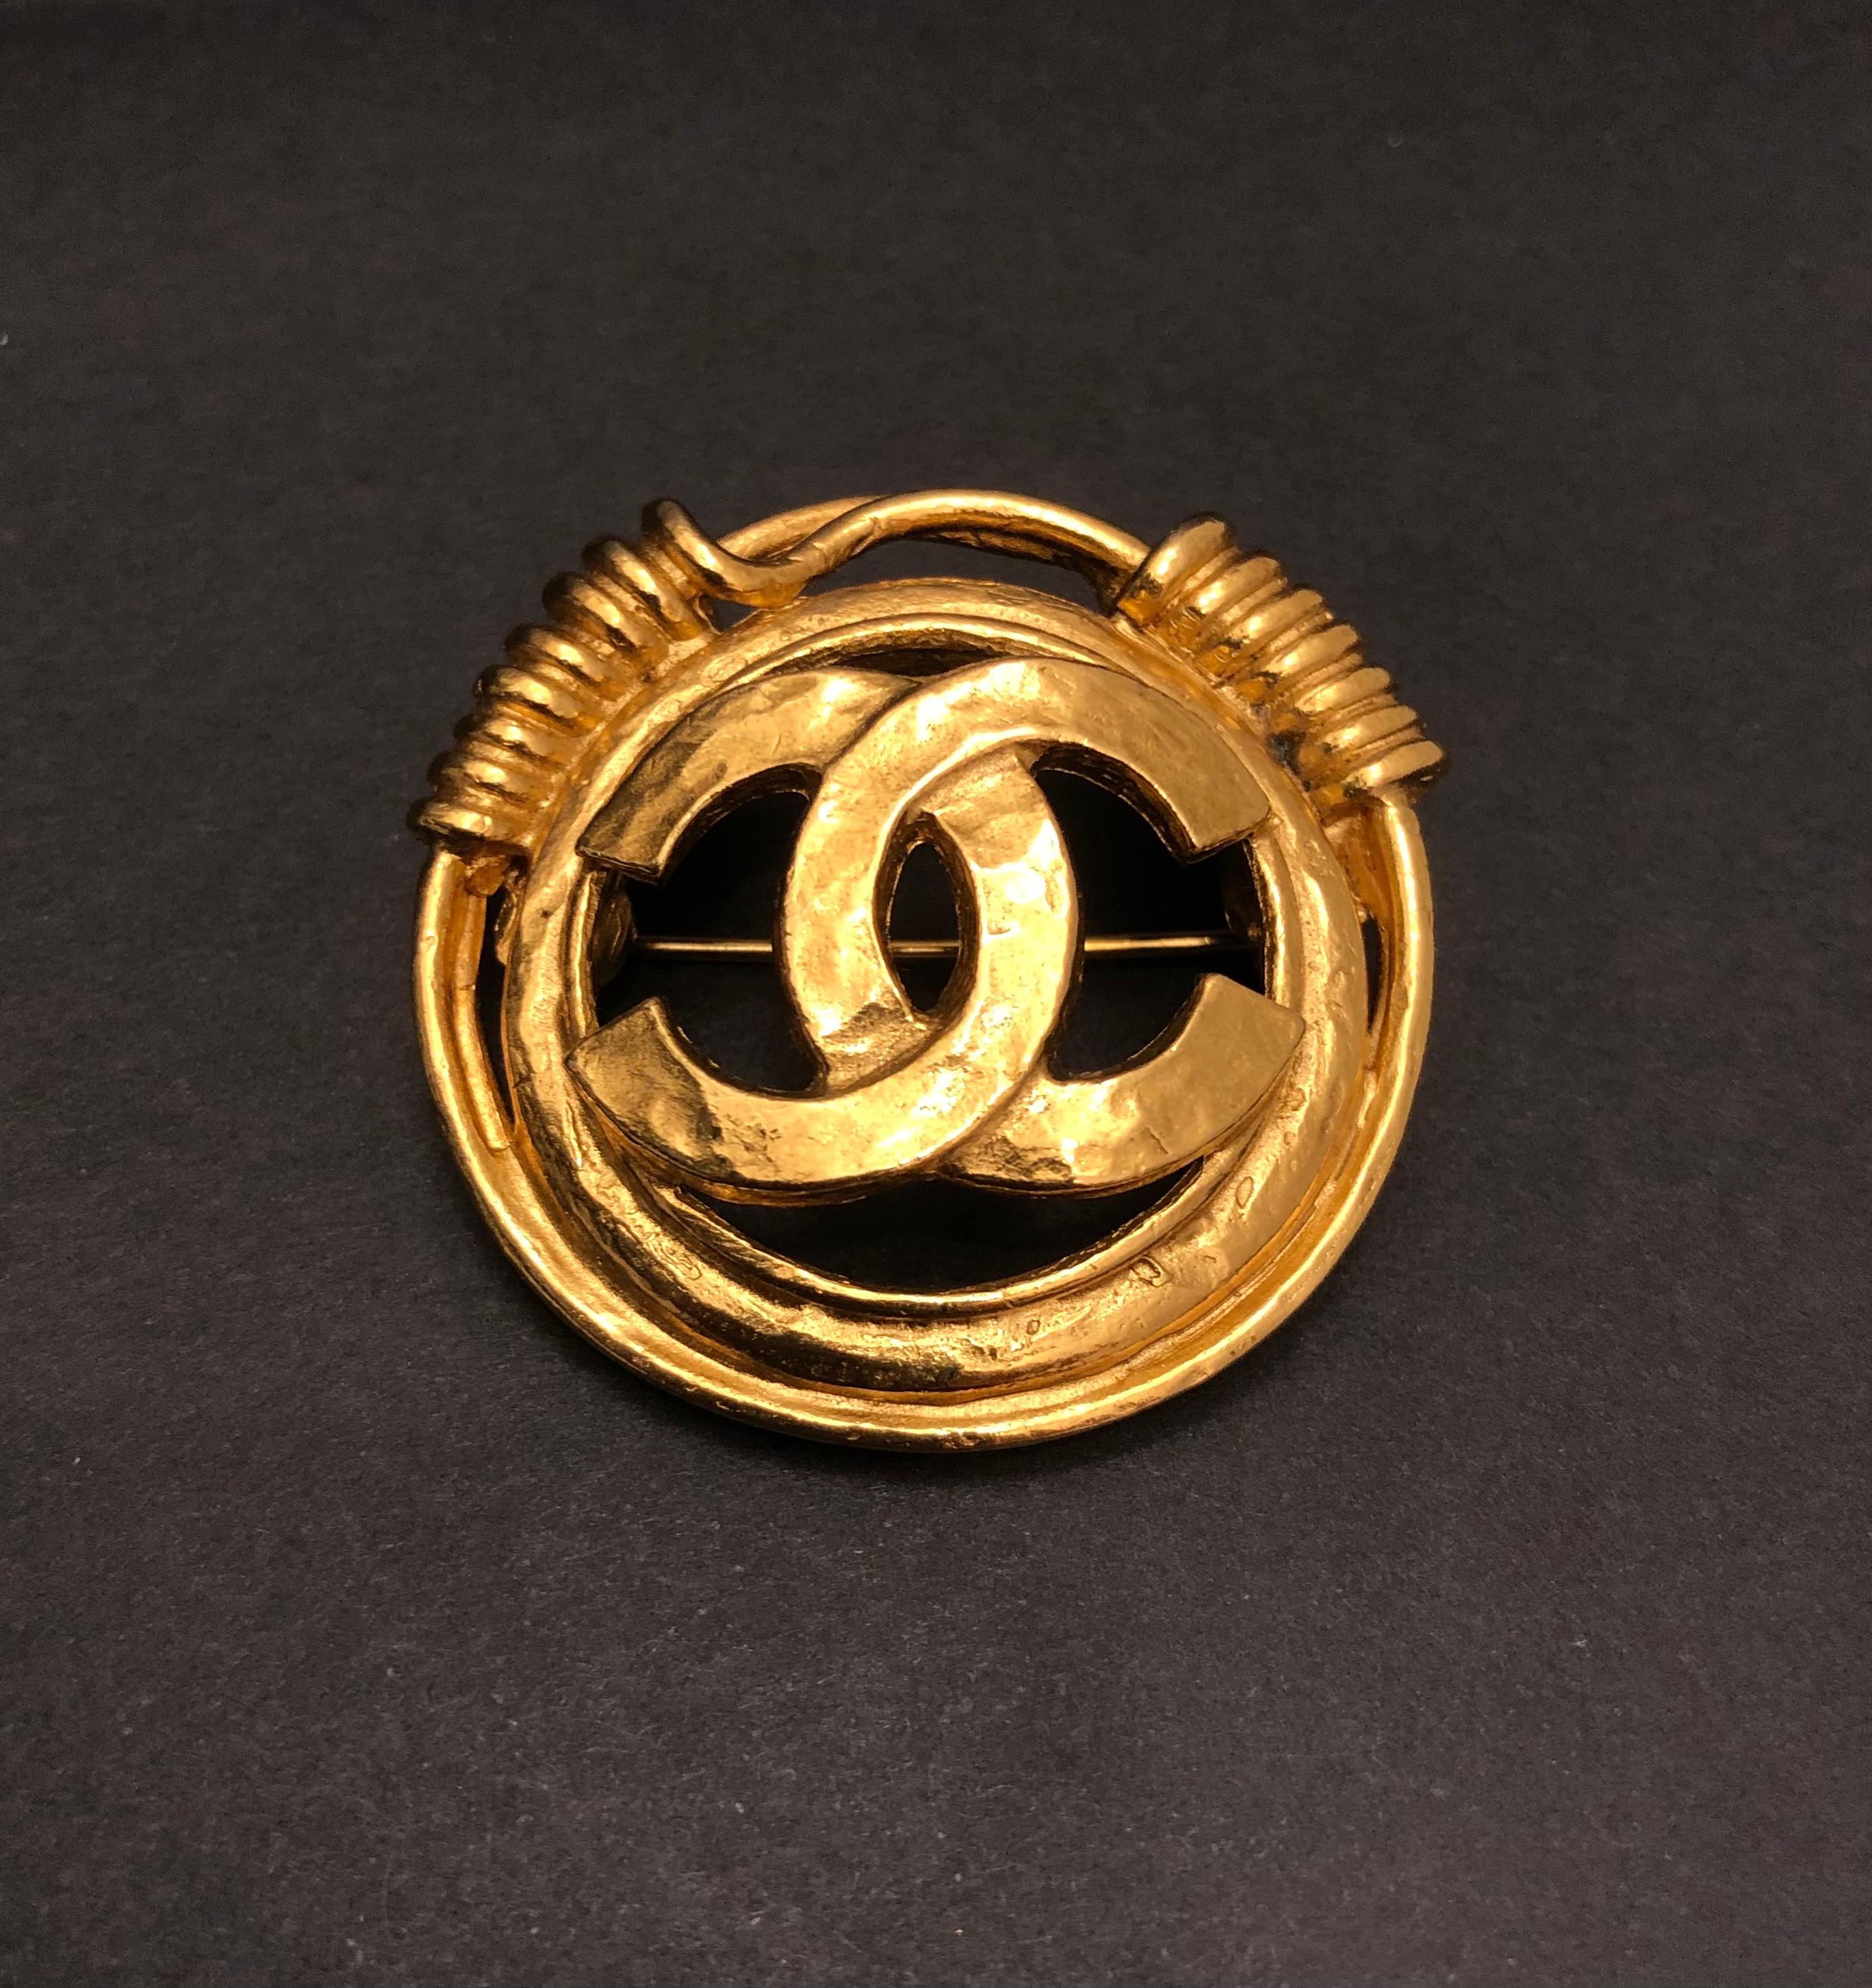 This vintage Chanel gold toned brooch is crafted of gold plated metal featuring a CC logo surrounded by a gold toned coiled ring. Stamped 94P made in France. Measures approximately 3.6 cm in diameter. Comes with box. 

Condition: Excellent vintage